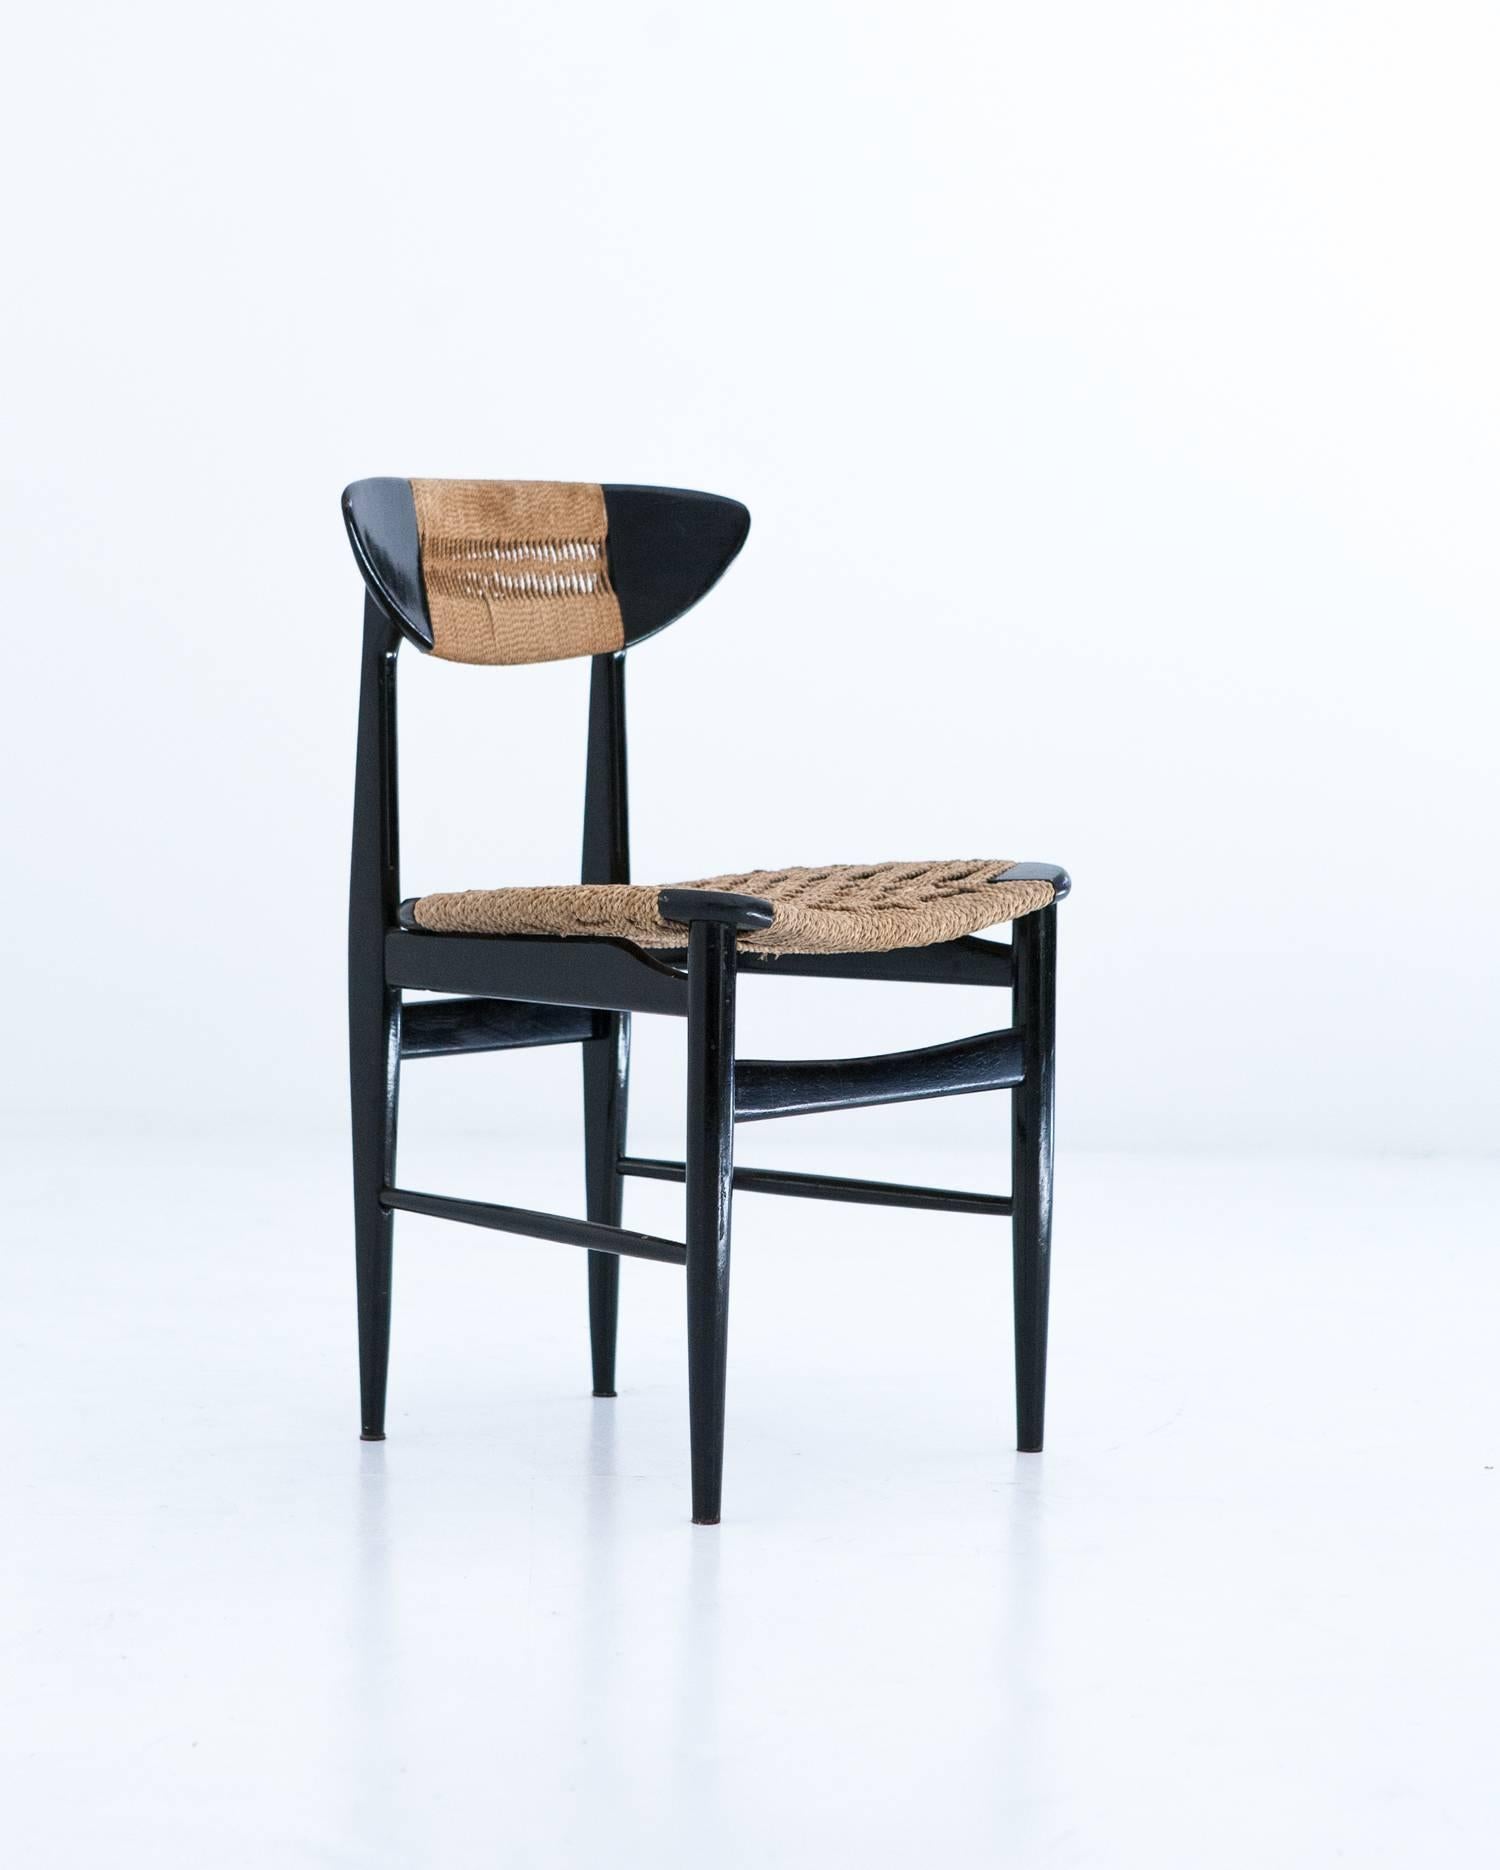 This set of six chairs was designed and produced in Denmark in the 1950s. Made of black lacquered wood and wicker.